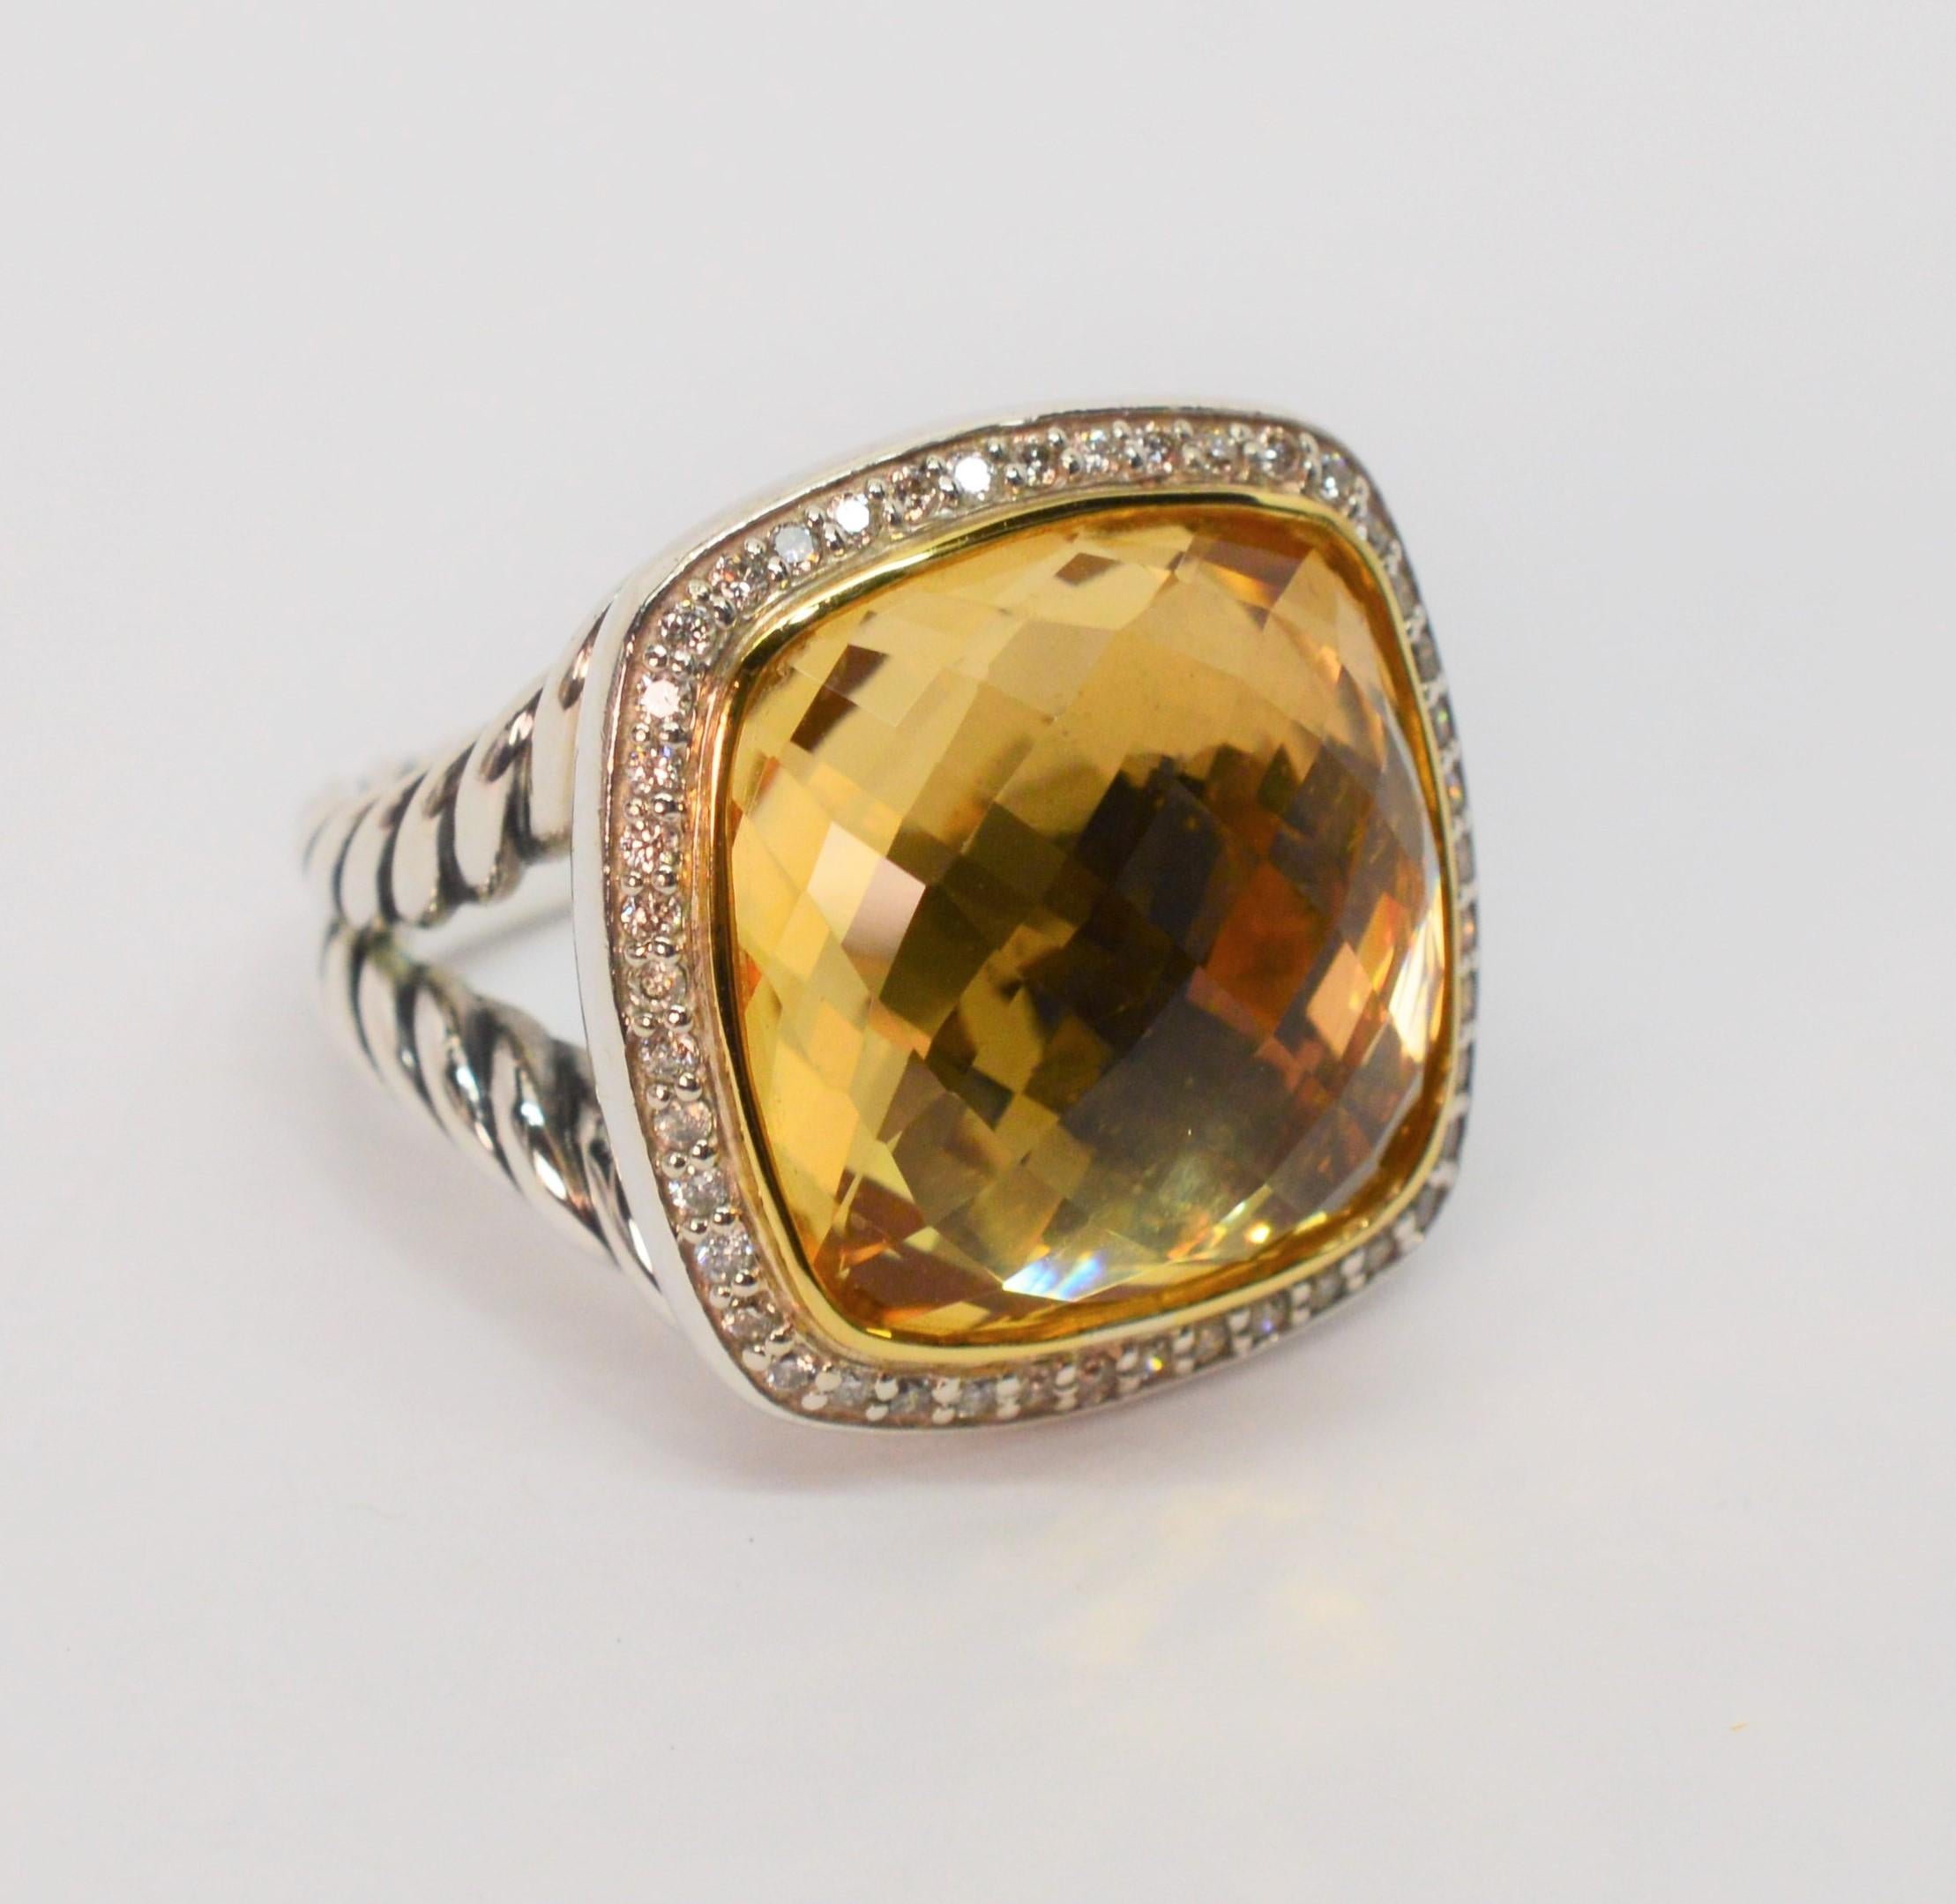 An impressive faceted 17mm cushion cut champagne citrine bezel set in eighteen karat yellow gold 18K is the star of this sterling silver ring by David Yurman. From the Albion Collection, this stunning stone is framed with .33 carat round brilliant